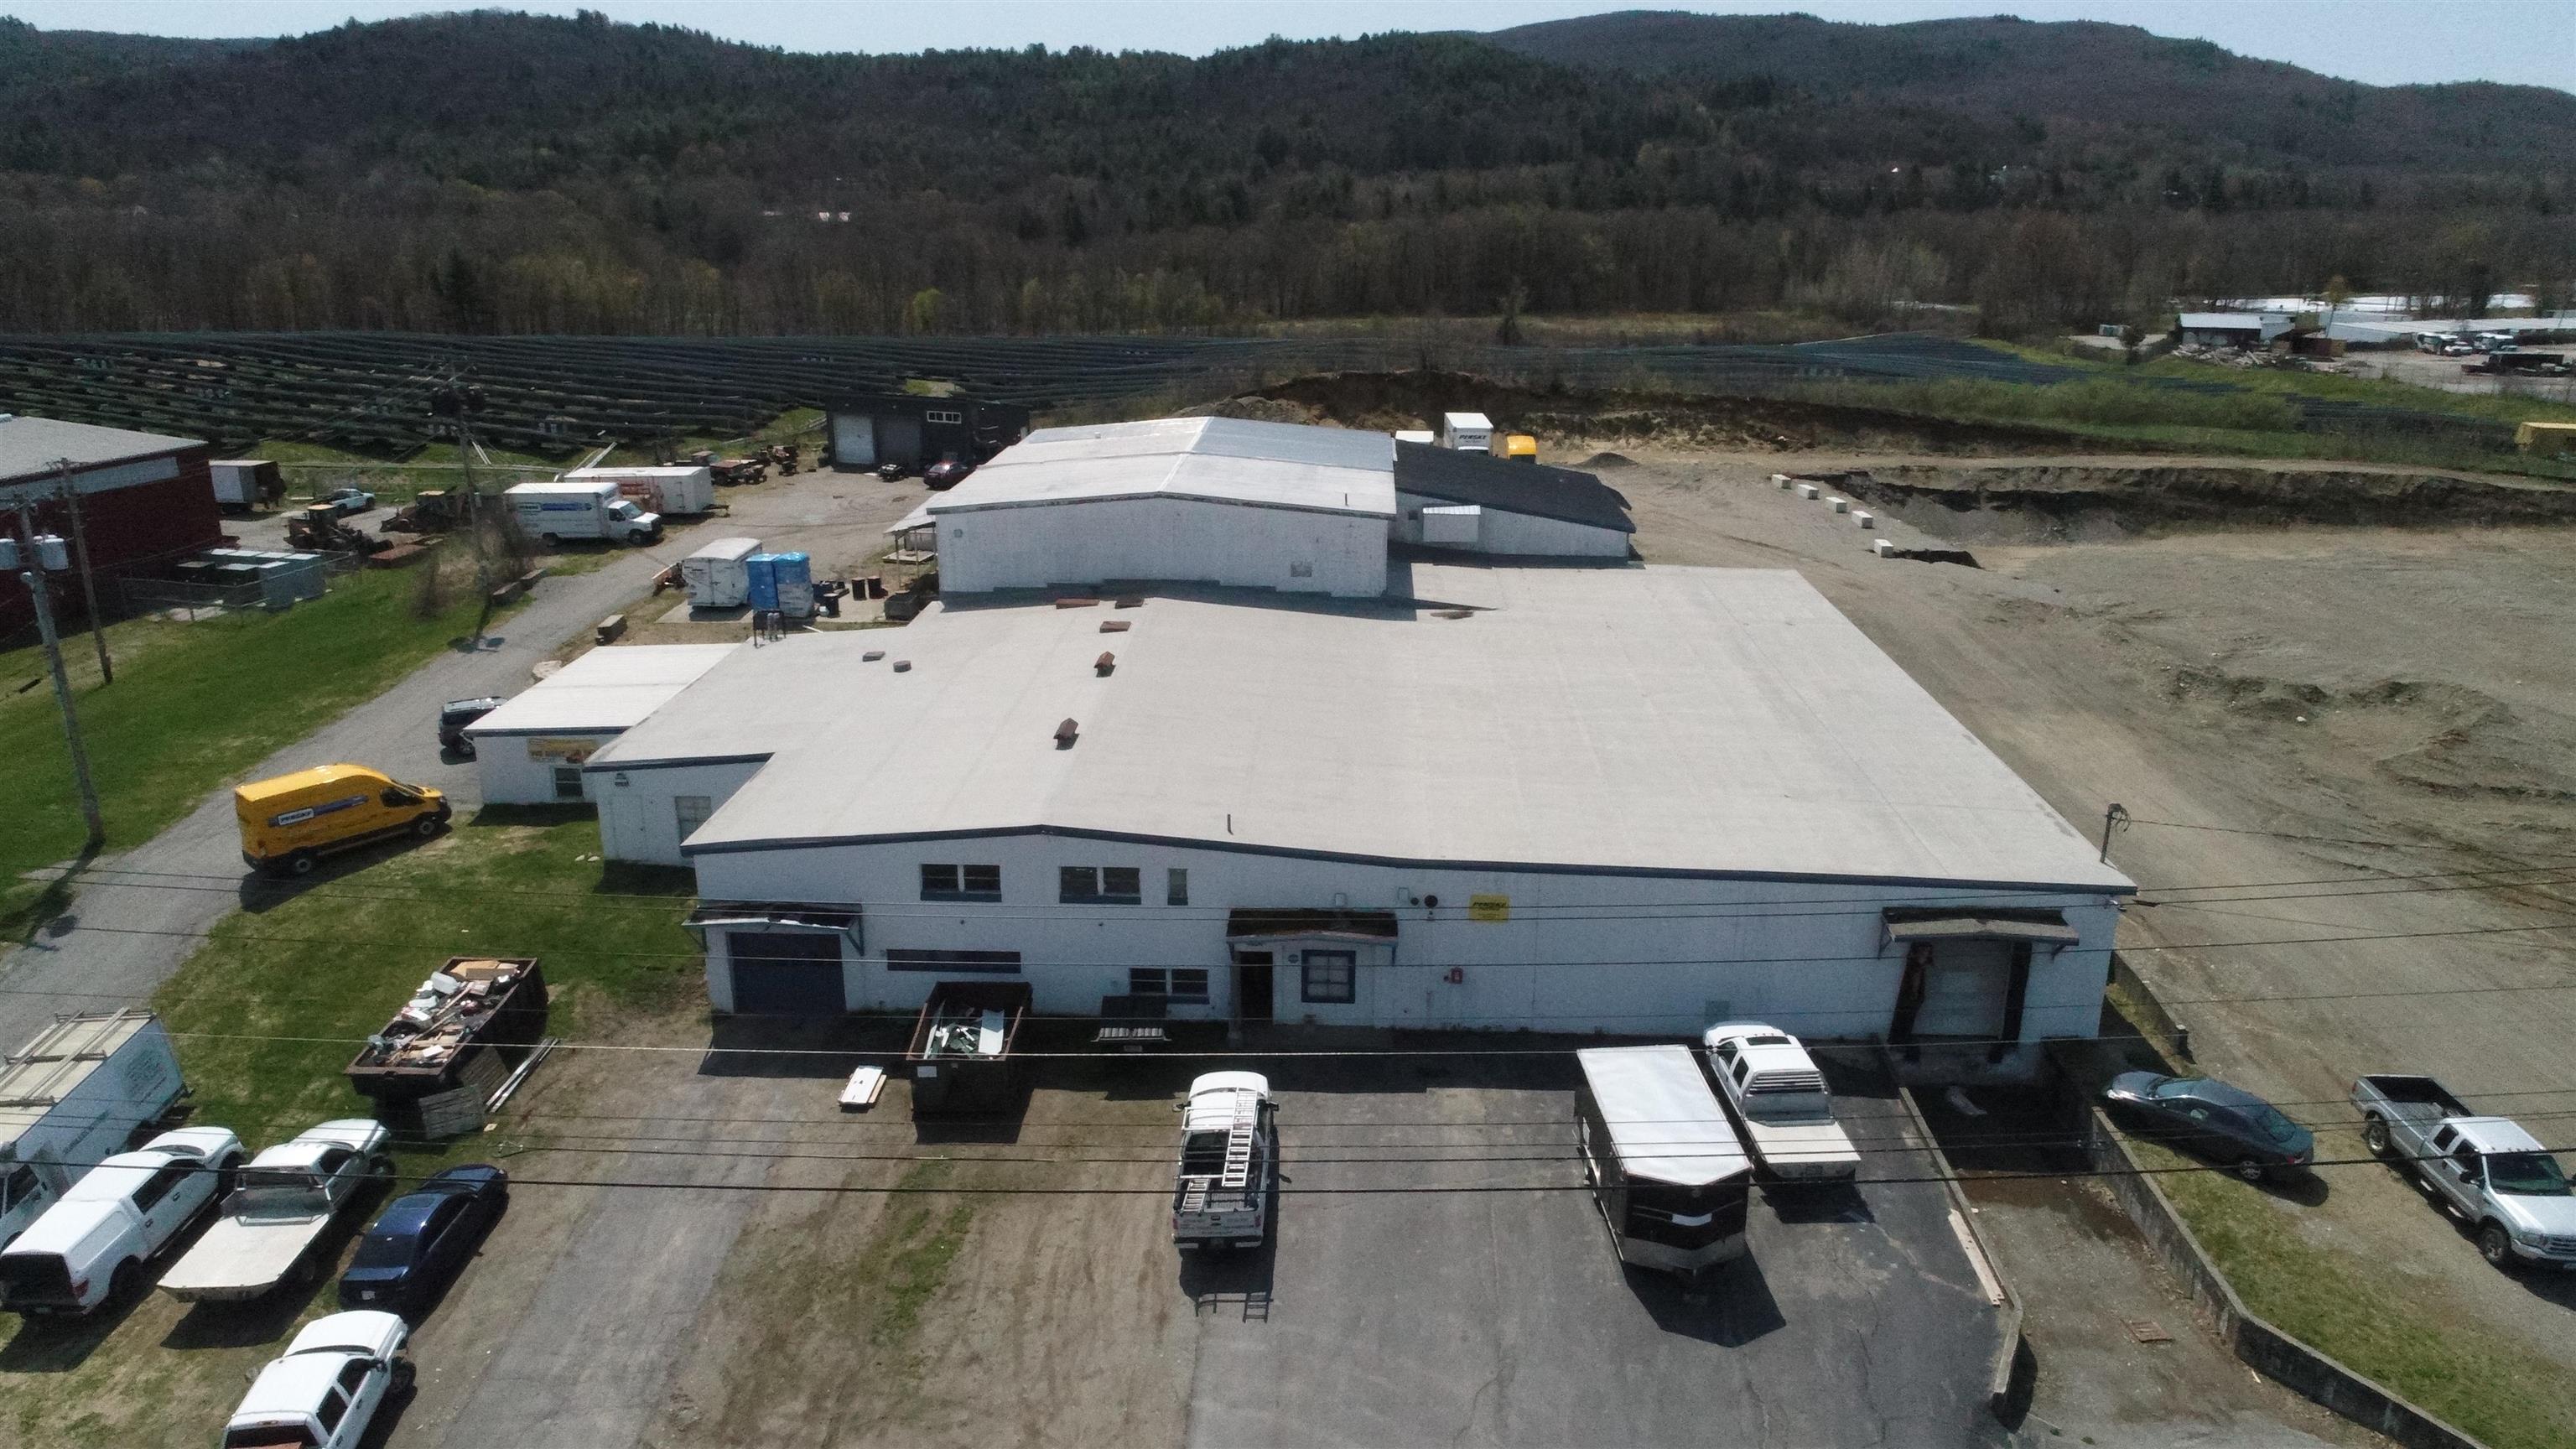 20,000 sq. ft. commercial/industrial/warehouse...